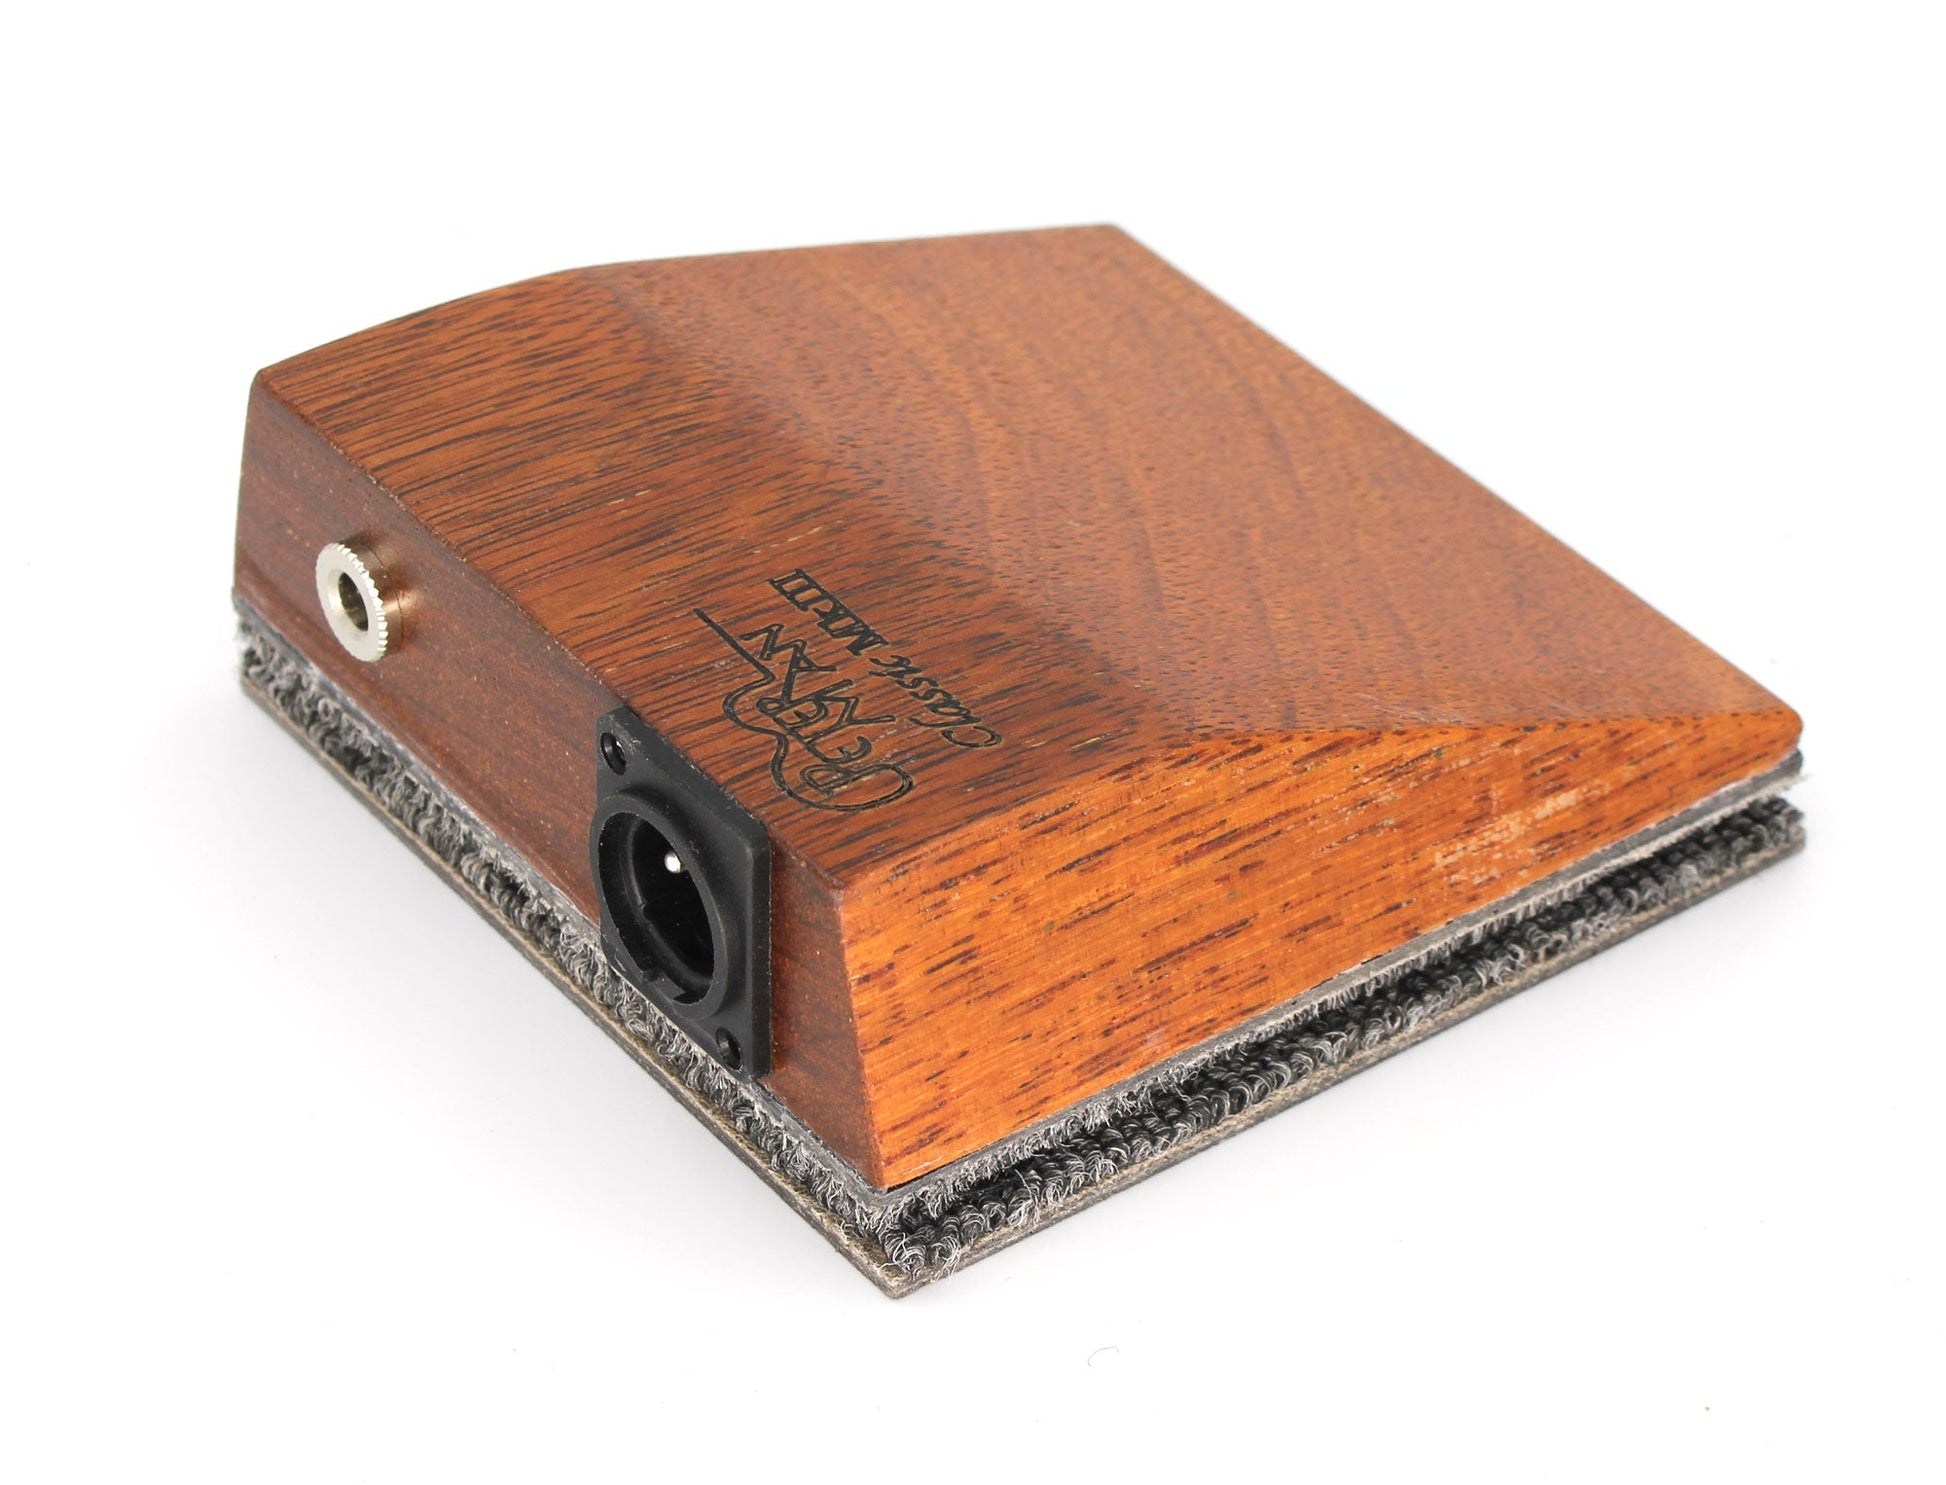 Classic professional stomp box with bass sound Mk3 with jack and xlr plugs - Peterman Acoustic Music Stompbox